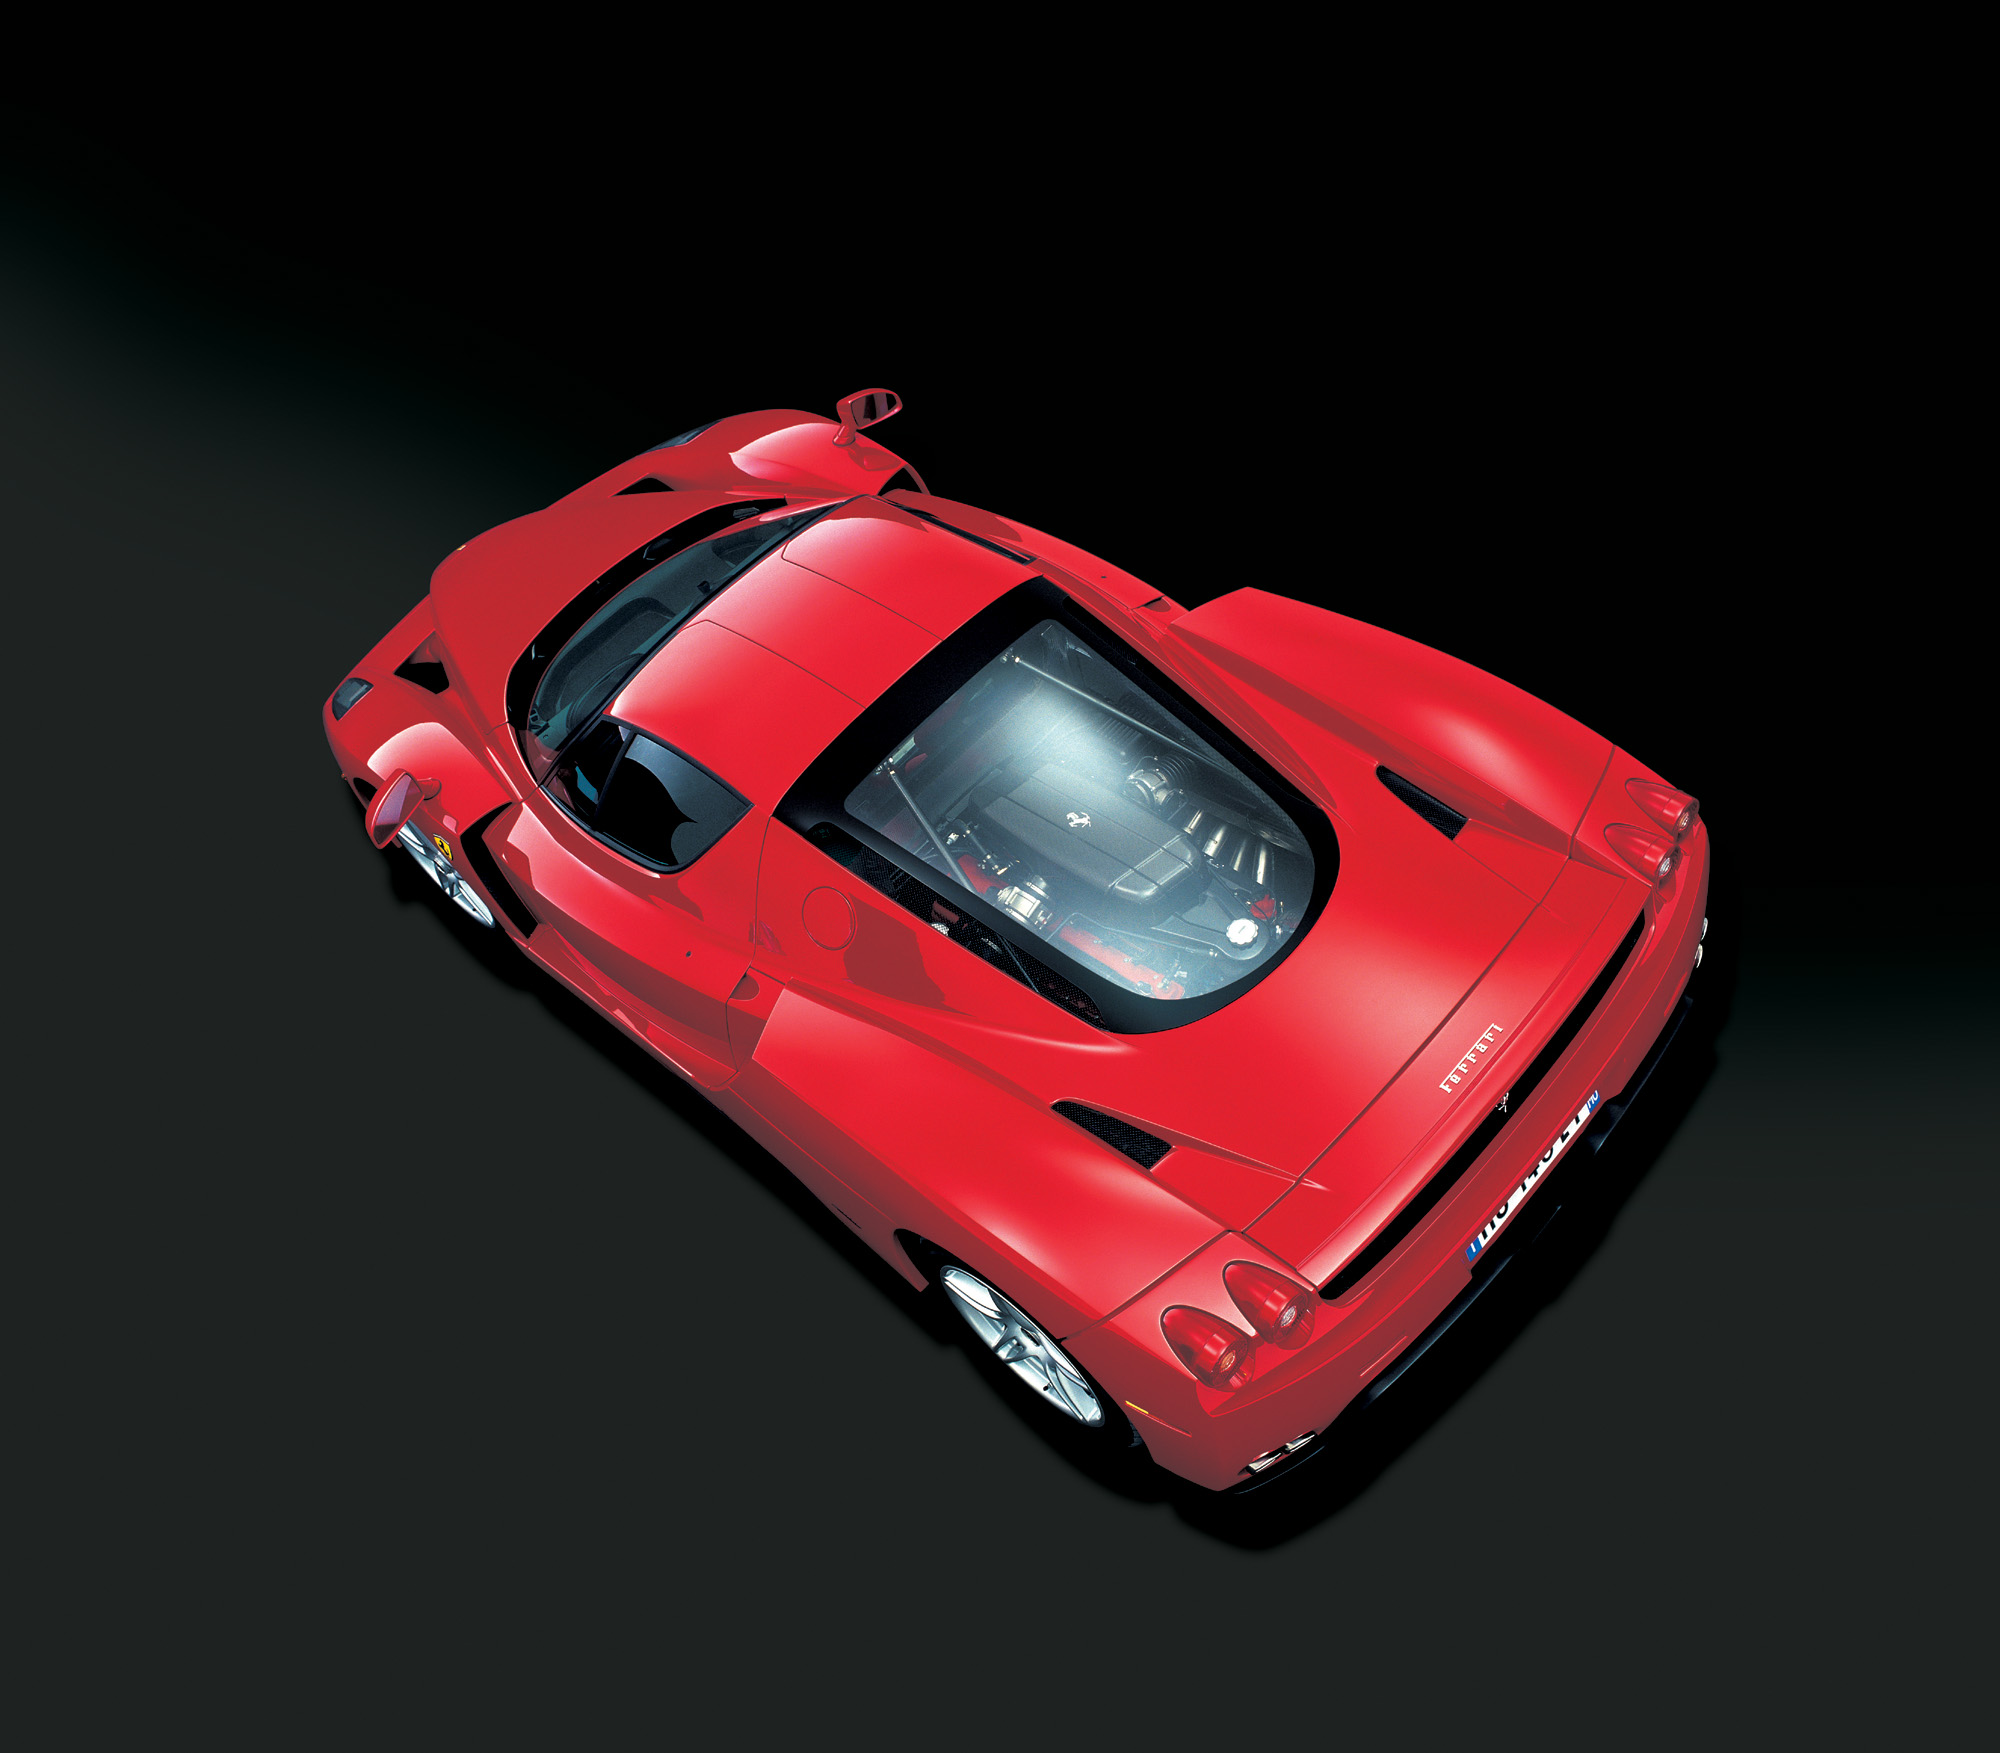 Ferrari Enzo - In 2002, the 660-horsepower, 218-mph Ferrari Enzo represented the pinnacle of race car performance for the street. Only 400 of the cars were built and Mayweather bought one. Always one to have money on his mind, he says he enjoys that it's appreciating in value.